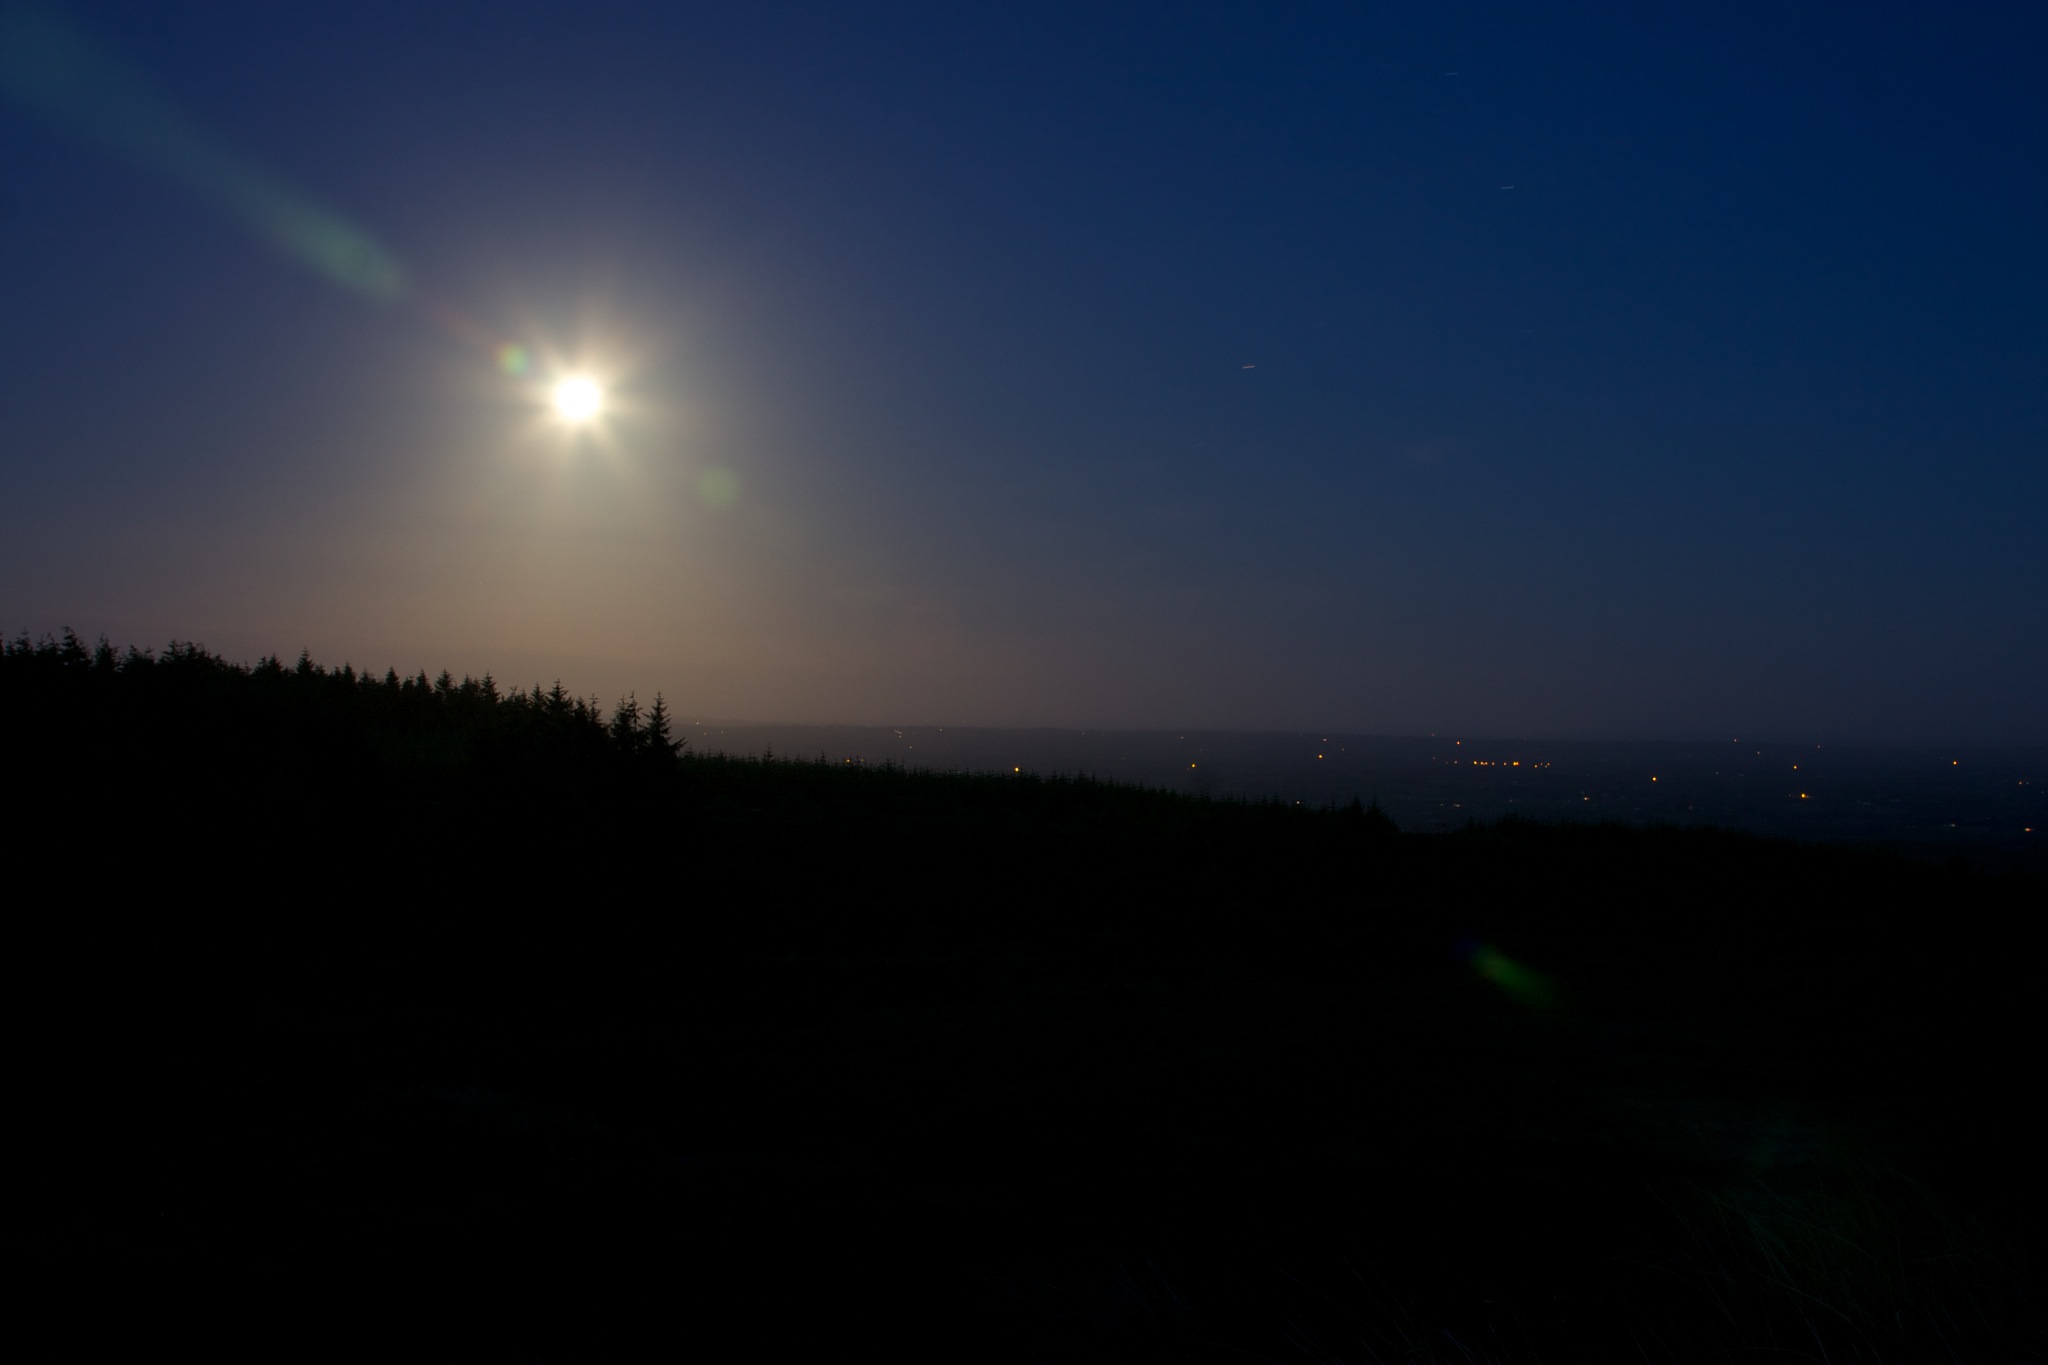 Bright hazy glow of the moon with the lights Monaghan town in the distance